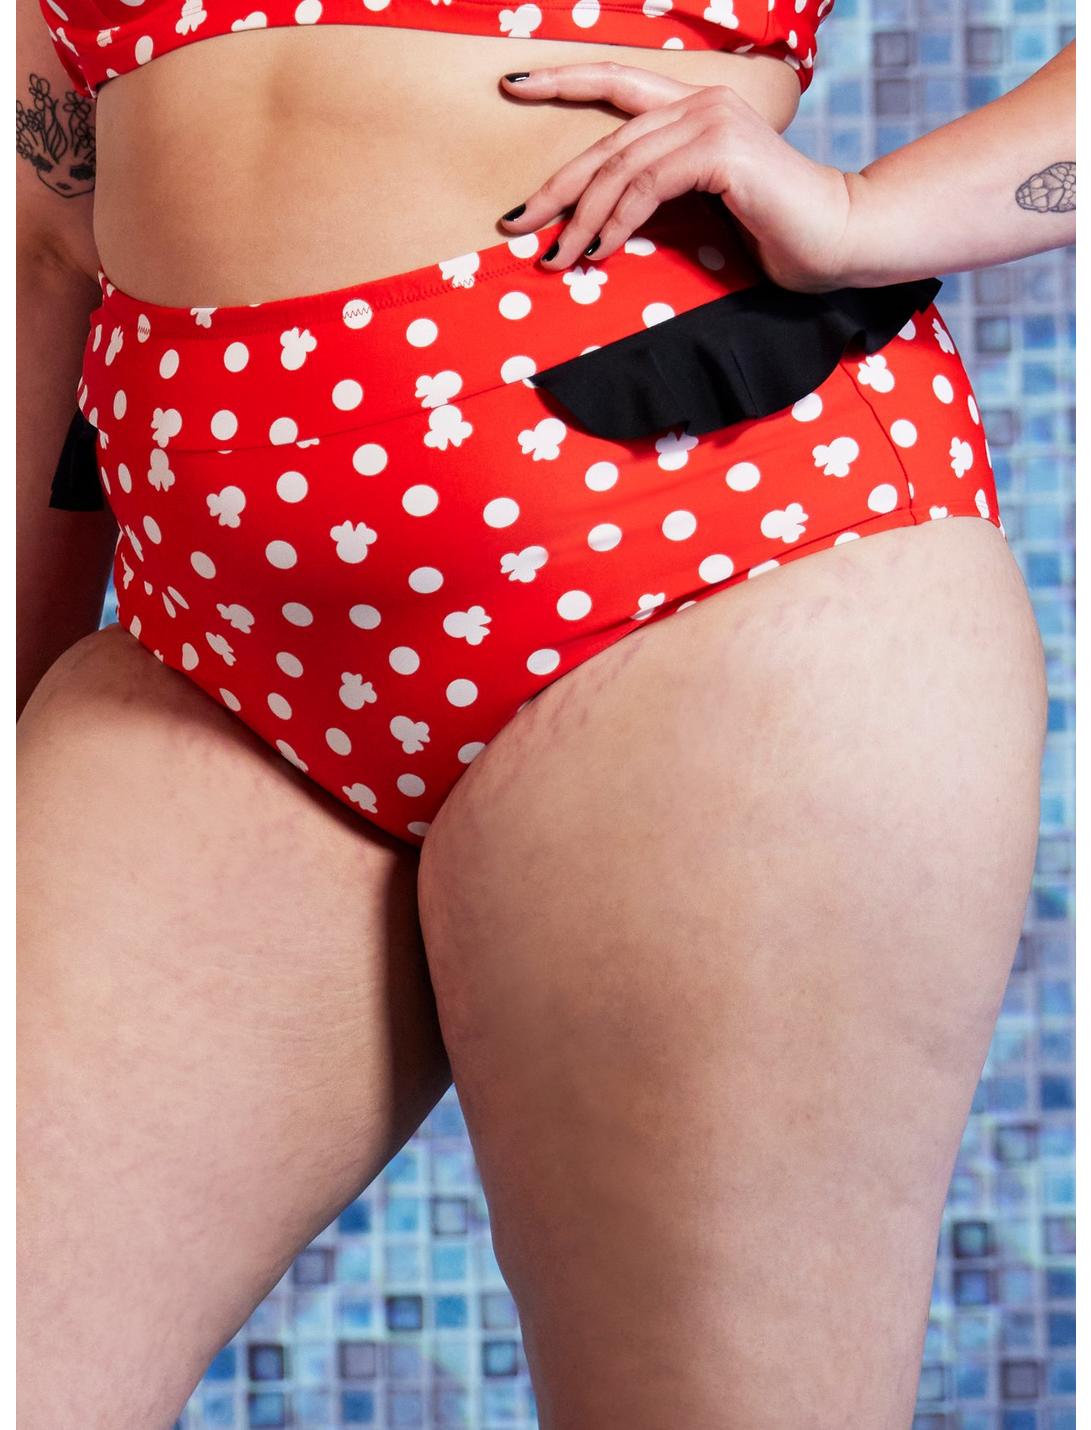 Disney Minnie Mouse Ruffled High-Waisted Swim Bottoms Plus Size, MULTI, hi-res